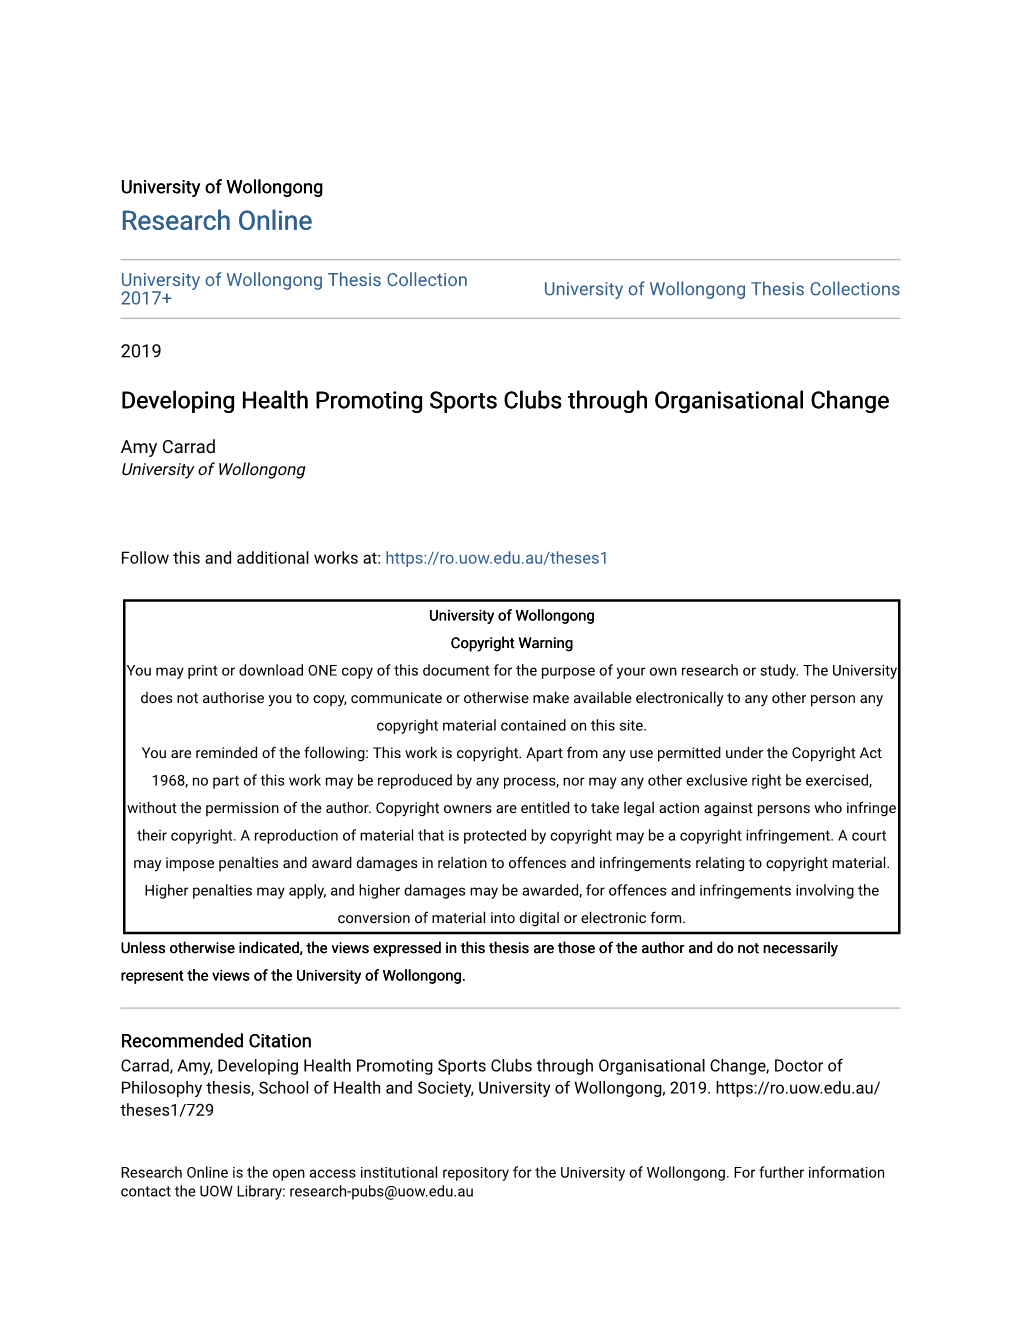 Developing Health Promoting Sports Clubs Through Organisational Change